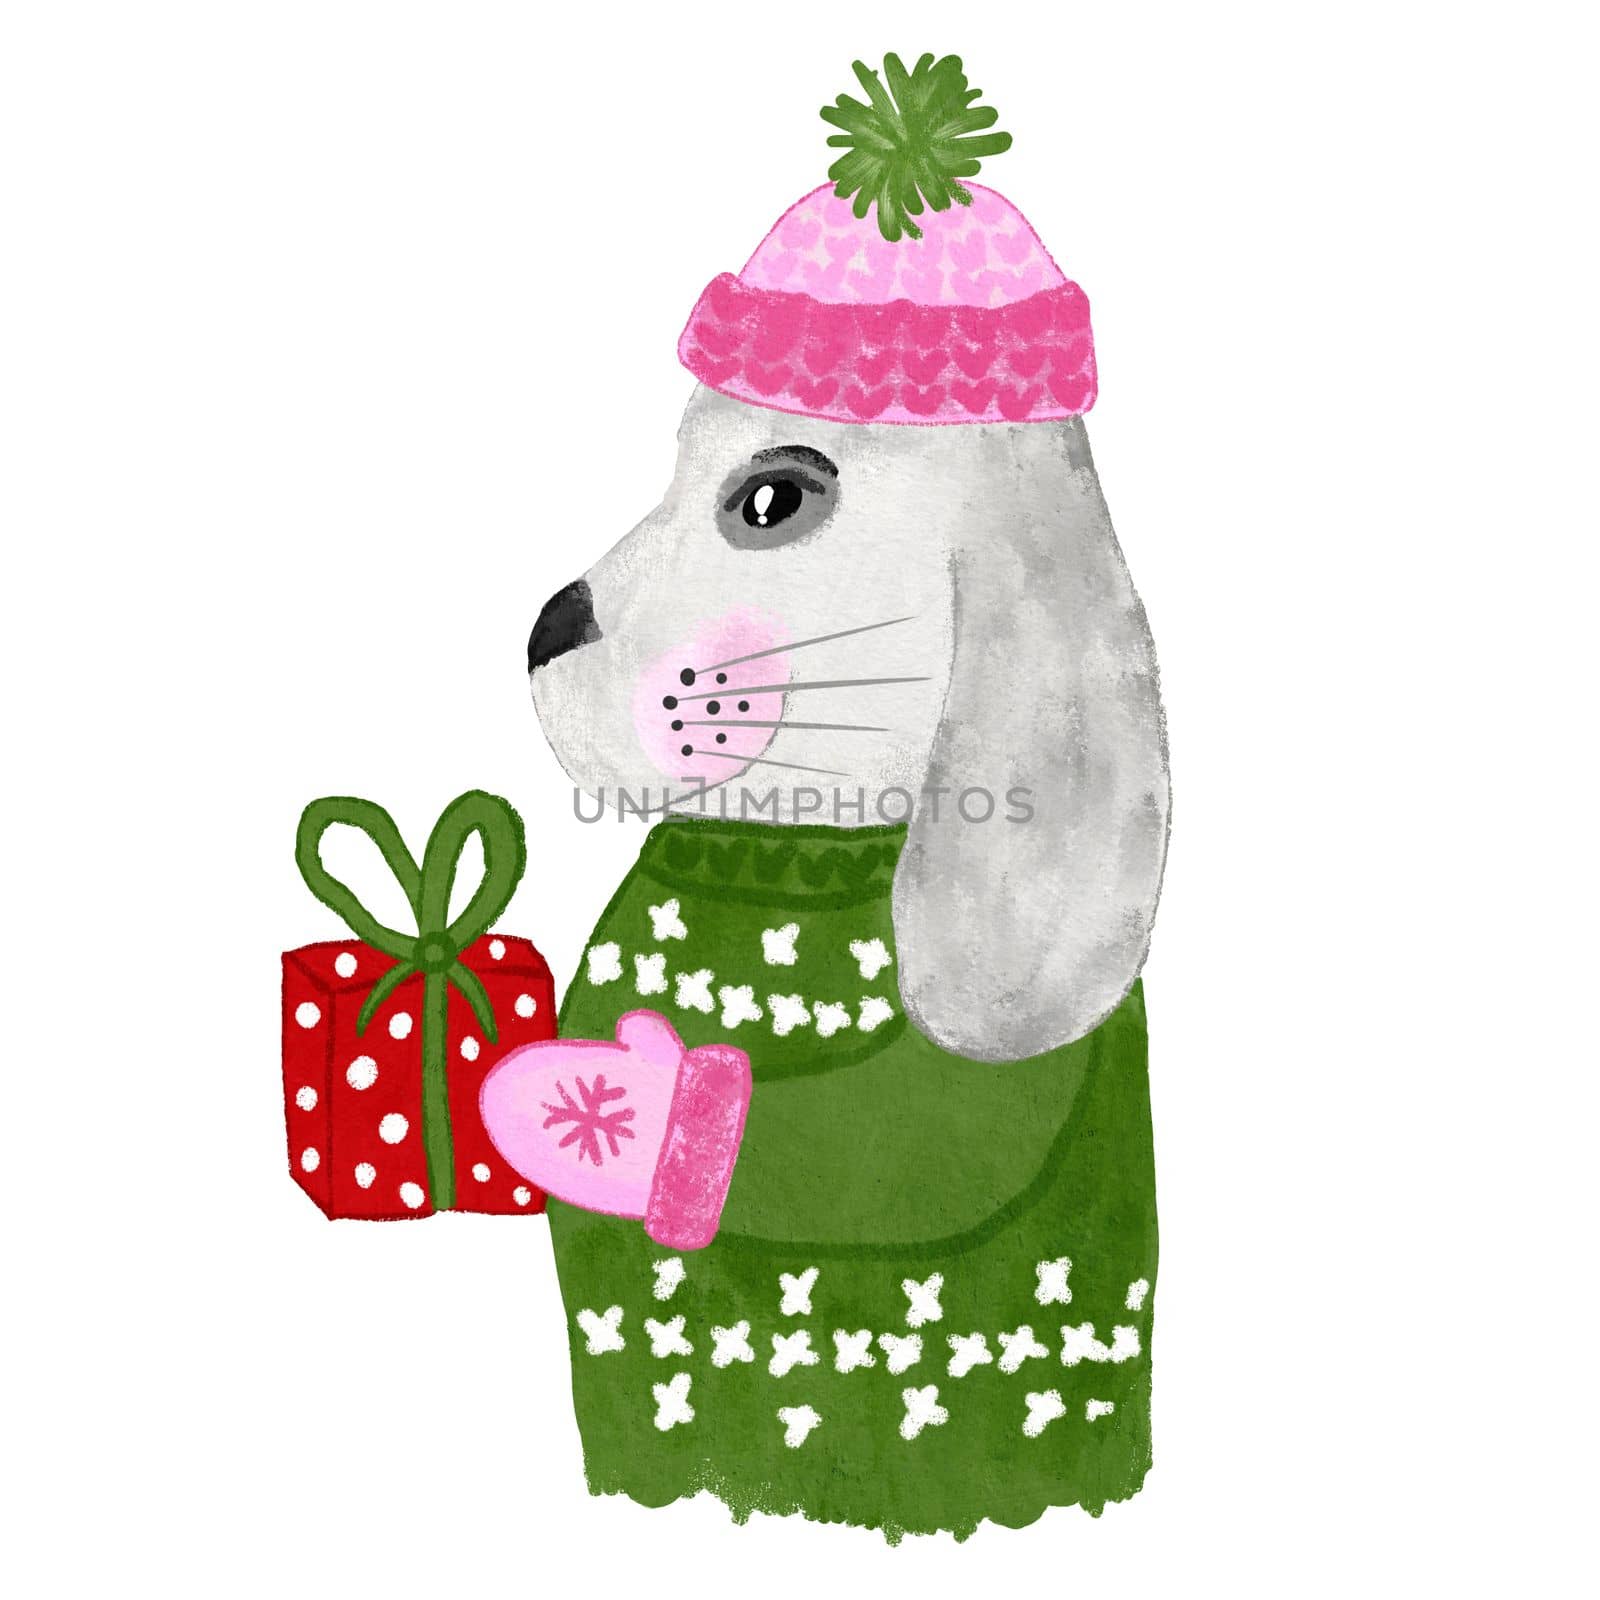 Hand drawn illustration of rabbit 2023 new year symbol with green pink gift present box ribbon bow. Cute kawaii cartoon hare bunny character, winter card poster invitation. Funny hat sweater gloves. by Lagmar